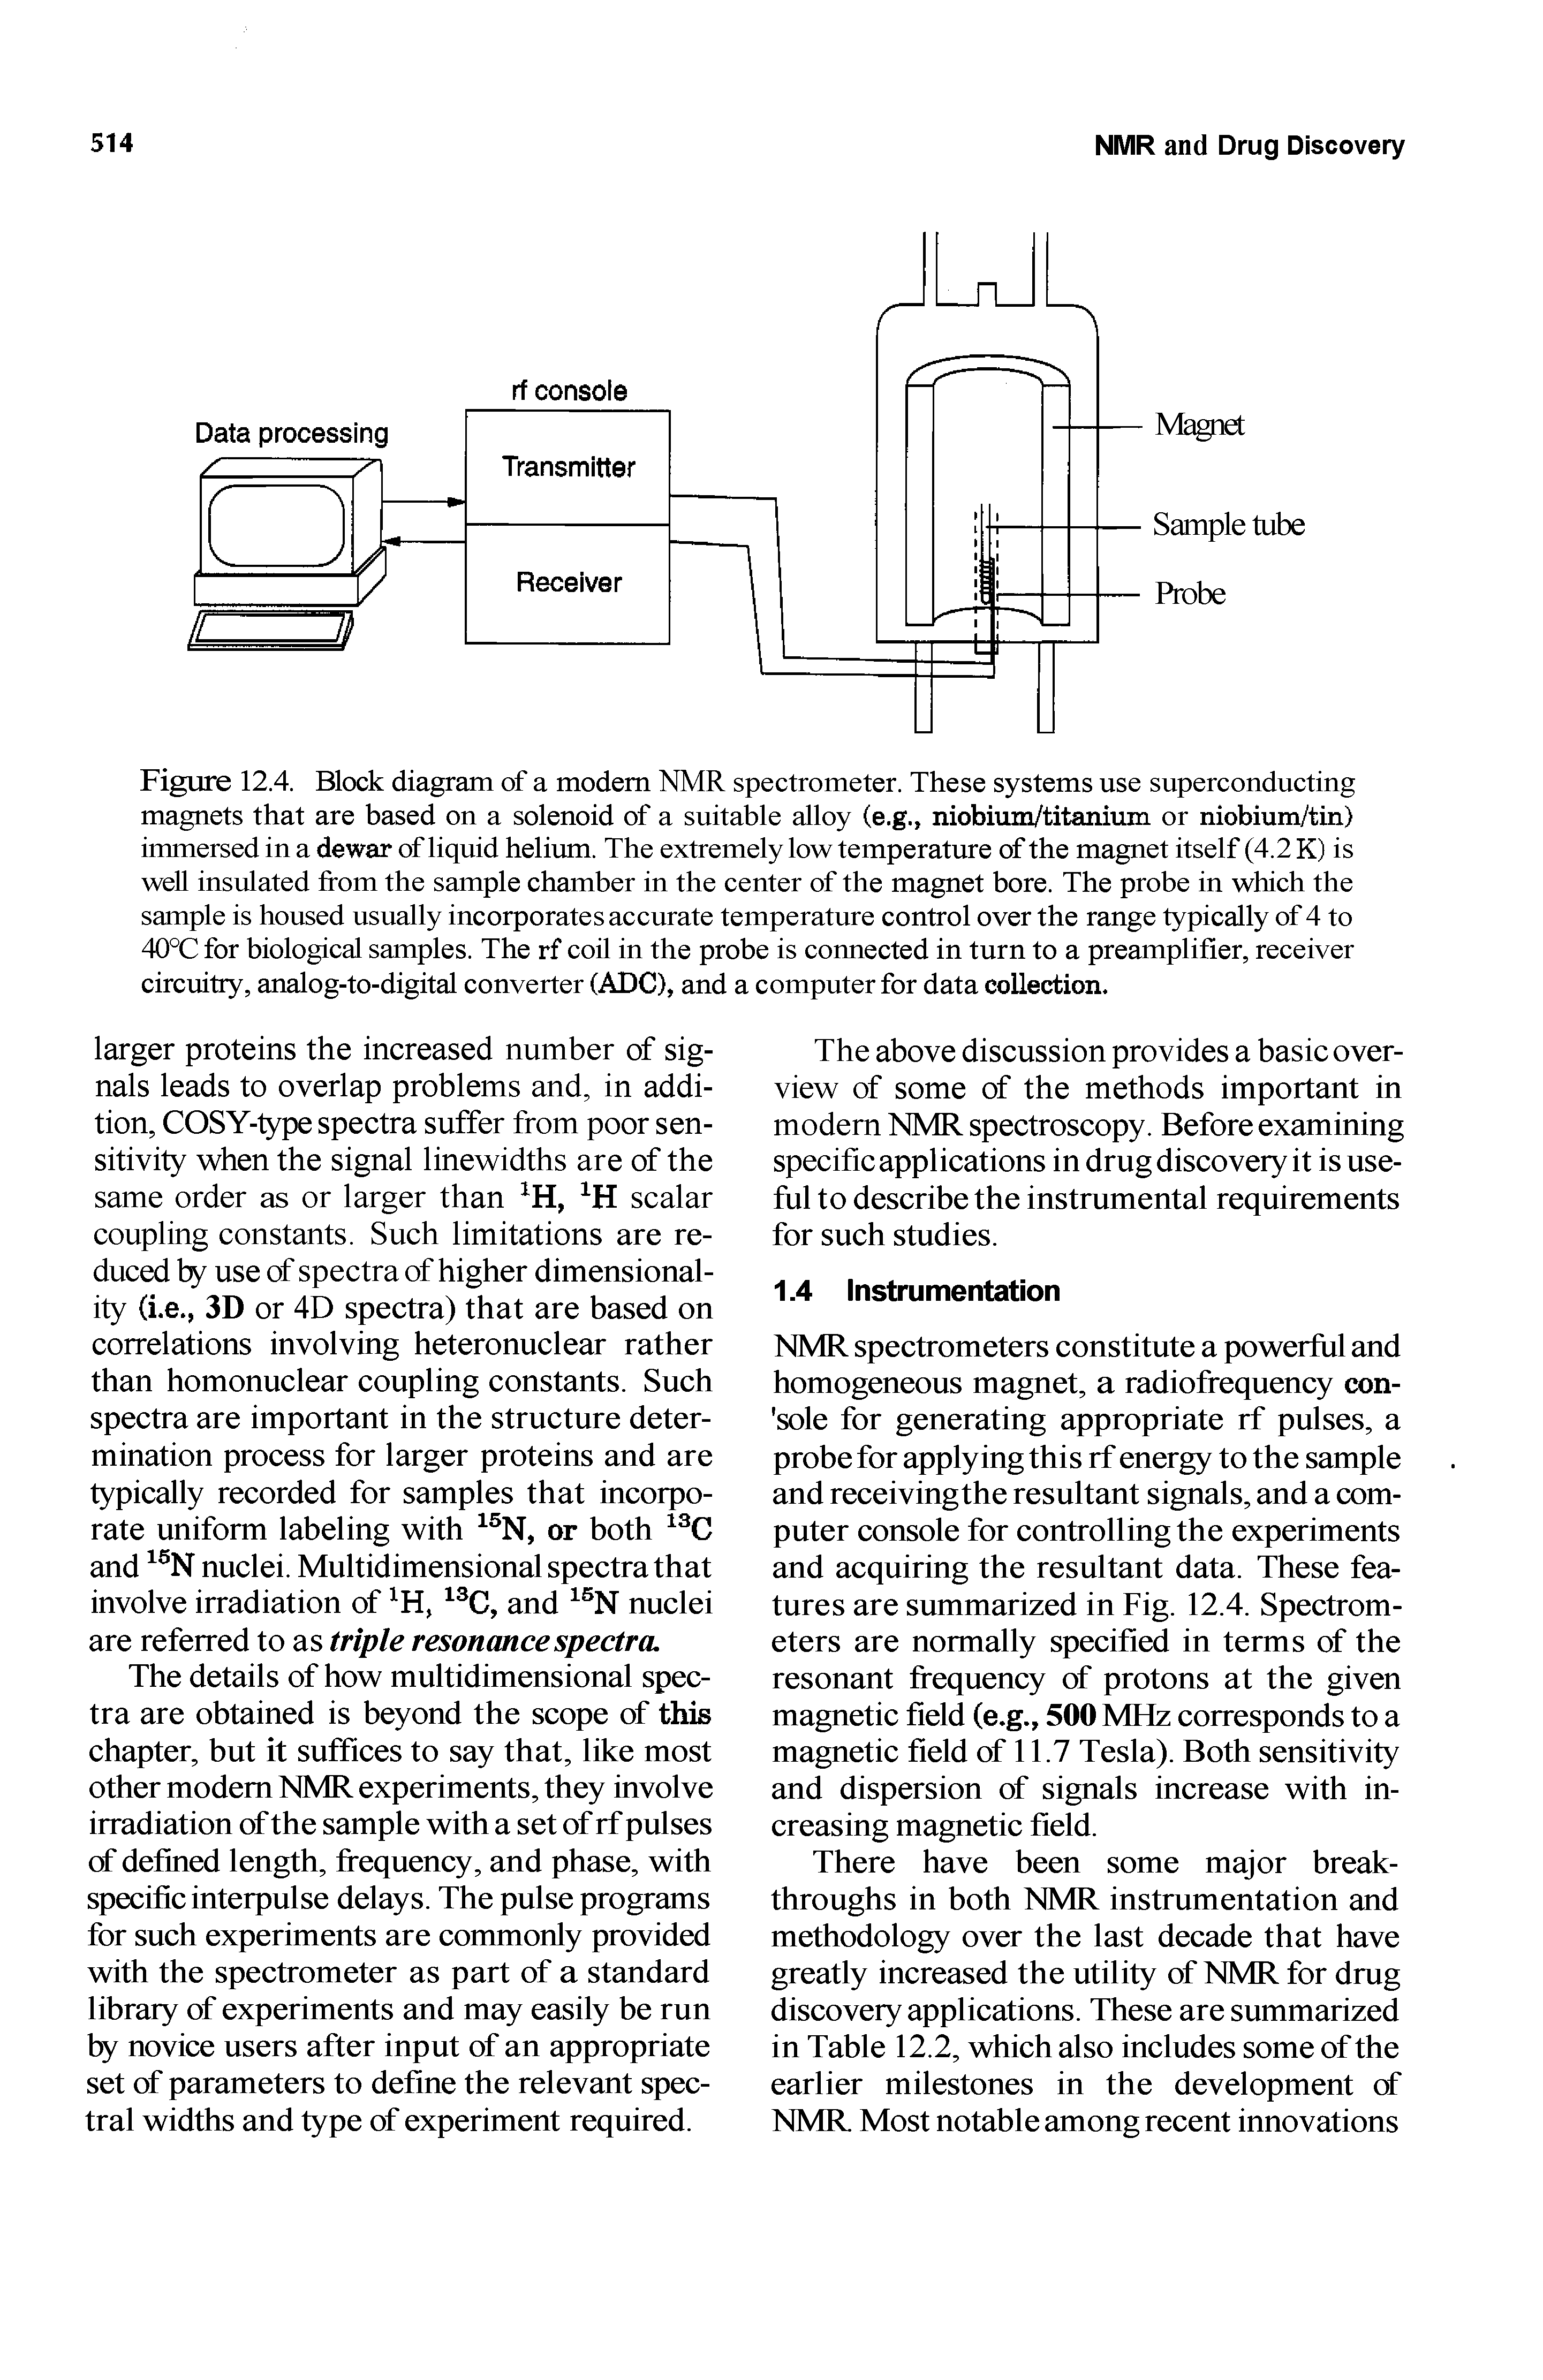 Figure 12.4. Block diagram of a modem NMR spectrometer. These systems use superconducting magnets that are based on a solenoid of a suitable alloy (e.g., niobium/titanium or niobium/tin) immersed in a dewar of liquid helium. The extremely low temperature of the magnet itself (4.2 K) is well insulated from the sample chamber in the center of the magnet bore. The probe in which the sample is housed usually incorporates accurate temperature control over the range typically of 4 to 40°C for biological samples. The rf coil in the probe is connected in turn to a preamplifier, receiver circuitry, analog-to-digital converter (ADC), and a computer for data collection.